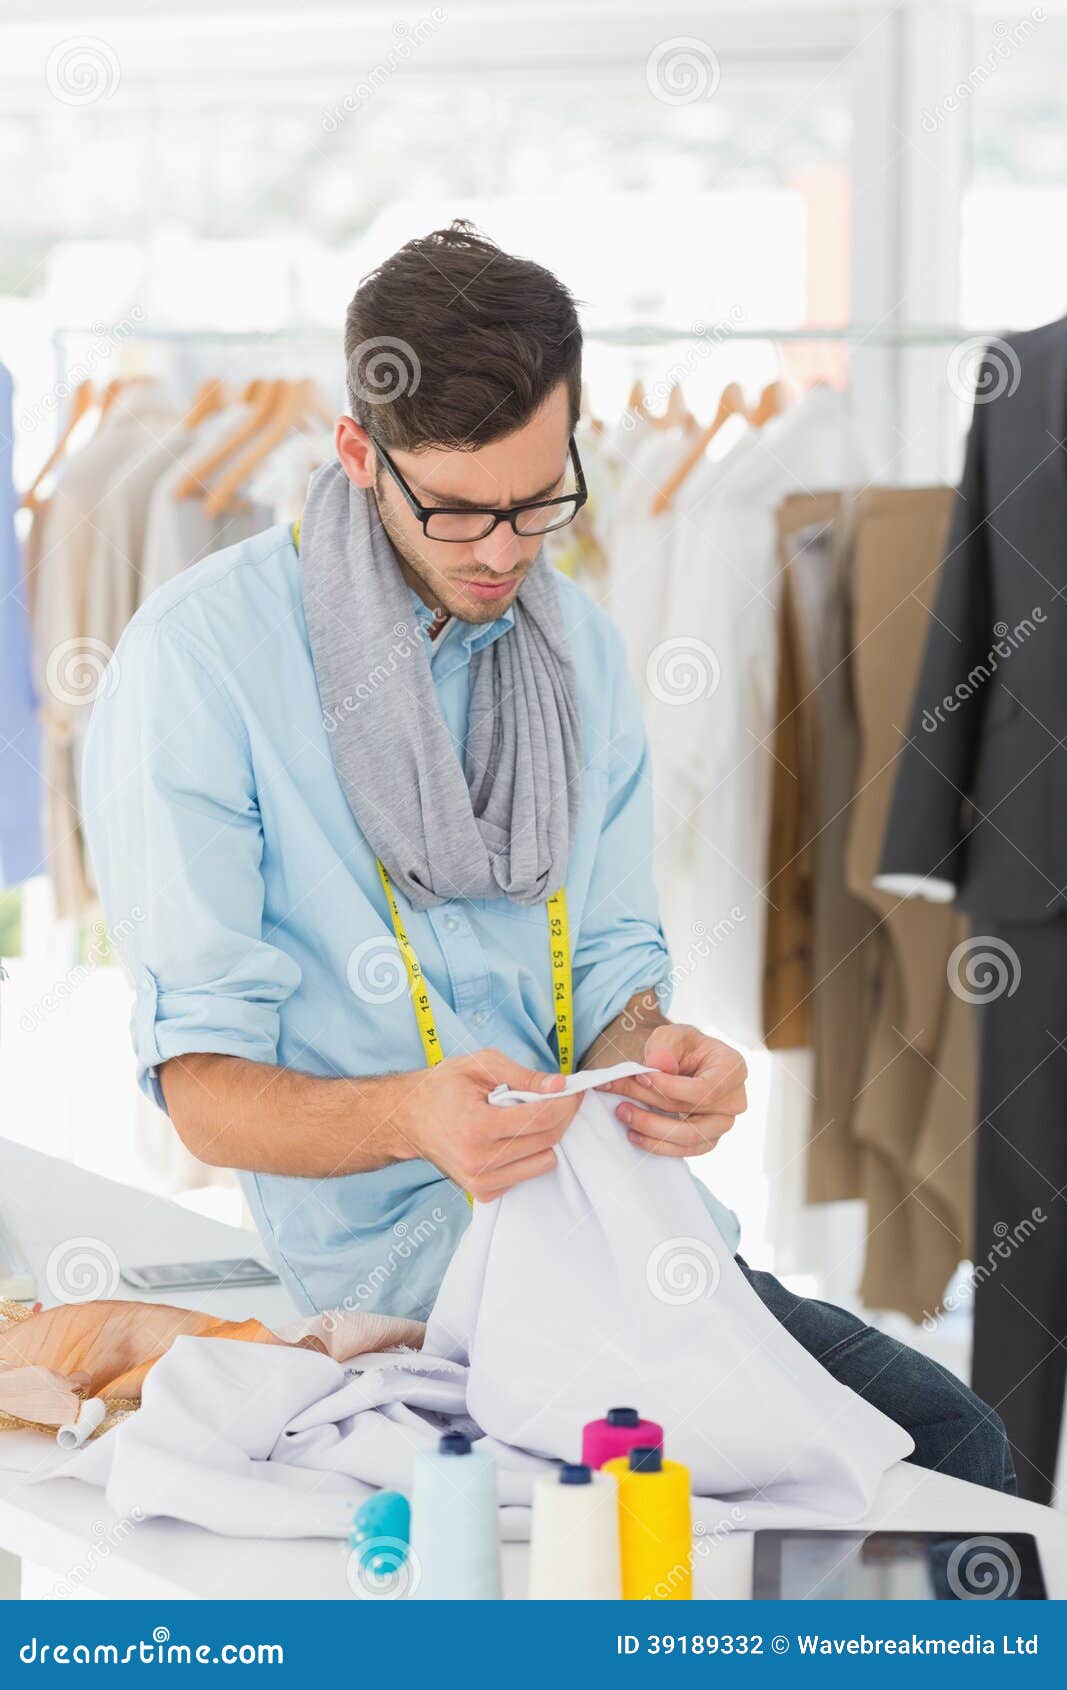 Concentrated Male Fashion Designer At Work Stock Photo ...